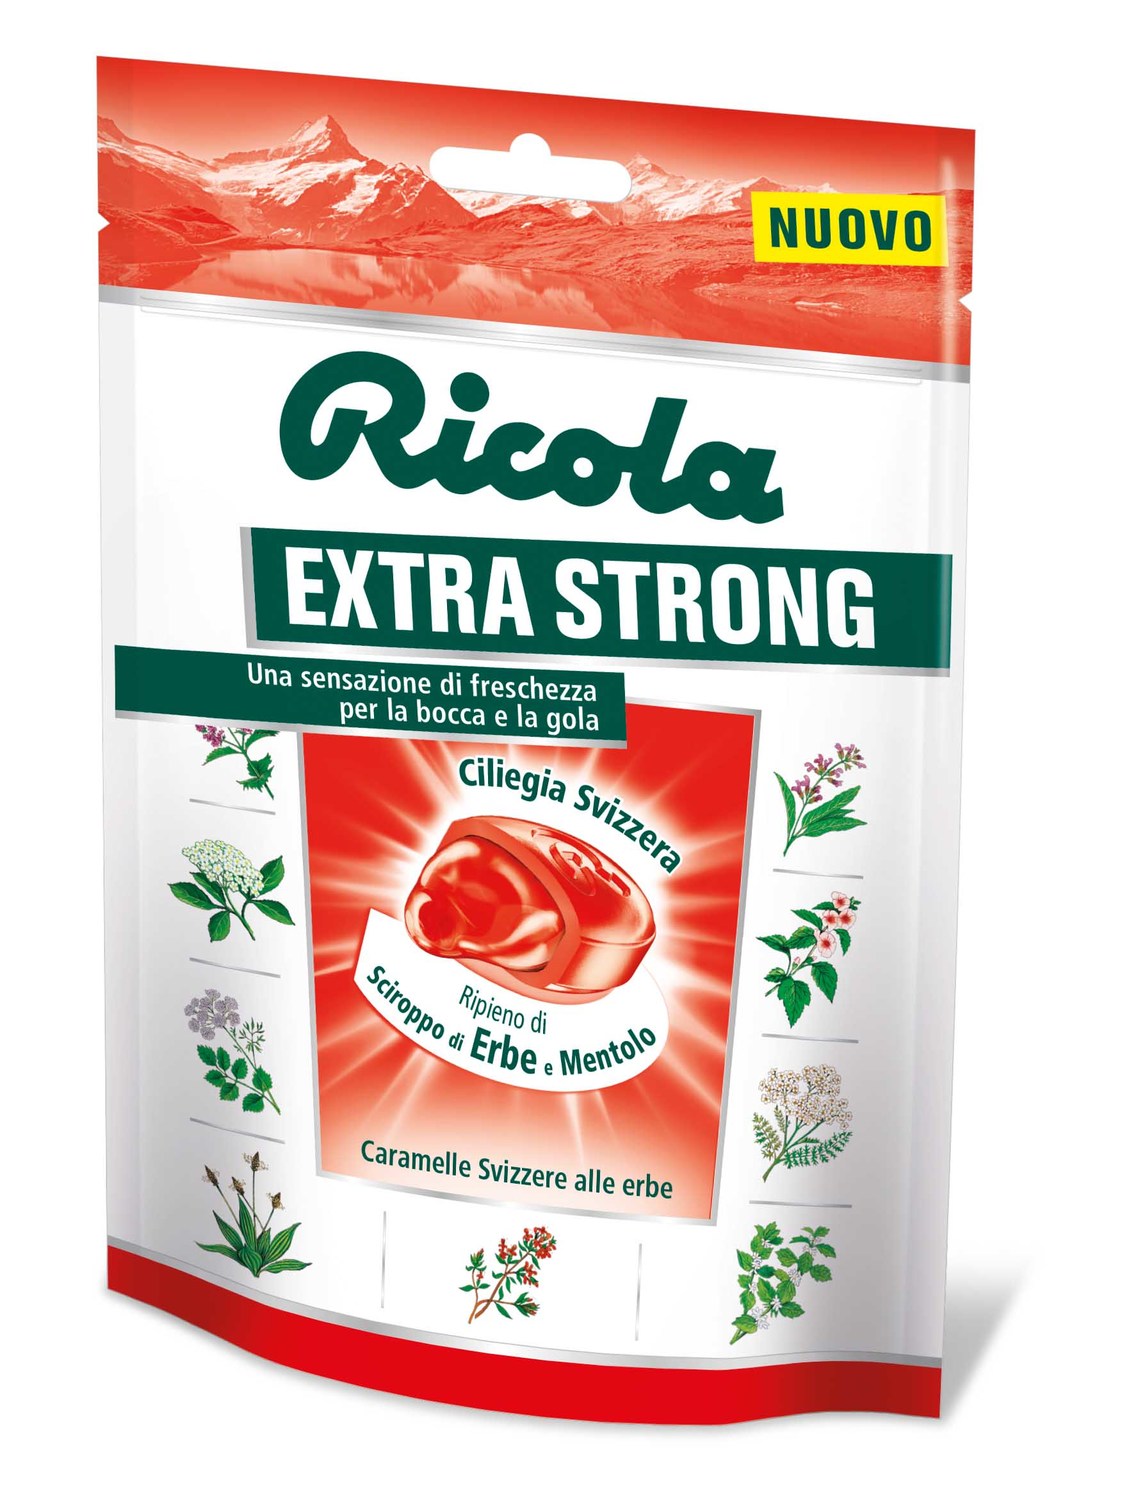 Ricola lancia due nuove caramelle extra forti